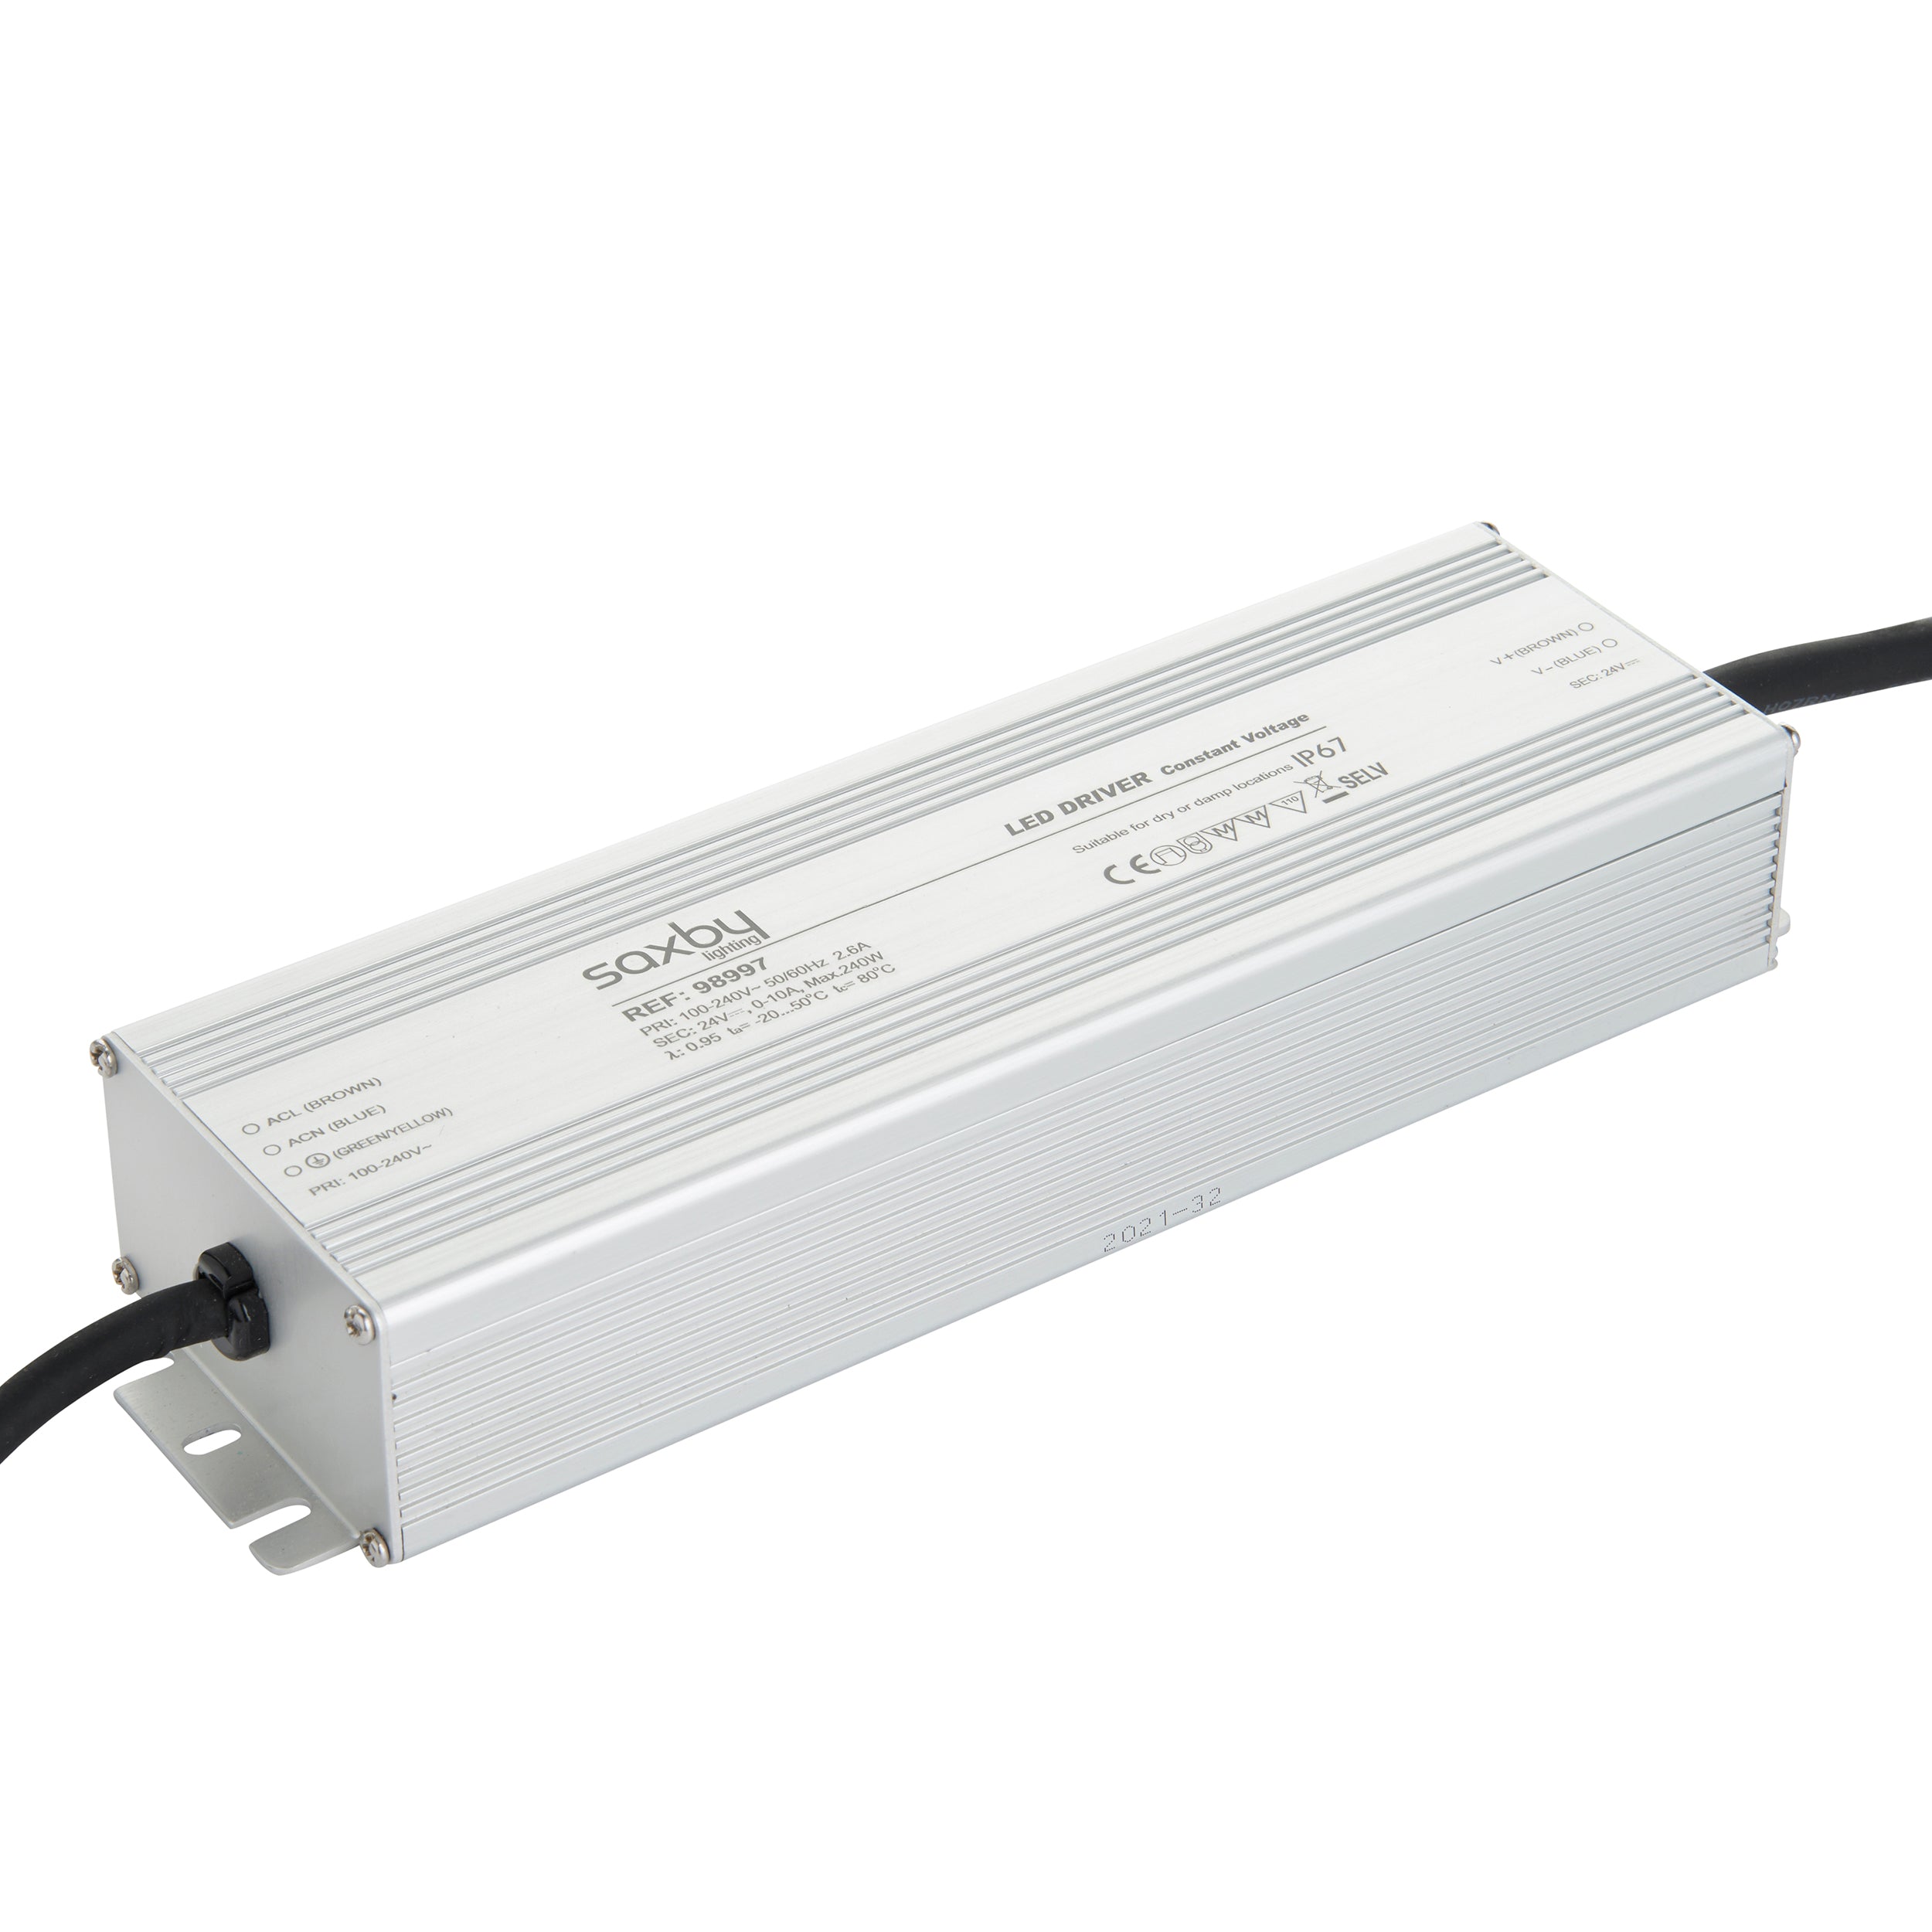 Saxby Lighting LED driver Constant Voltage iP67 24V 240W IP67 98997